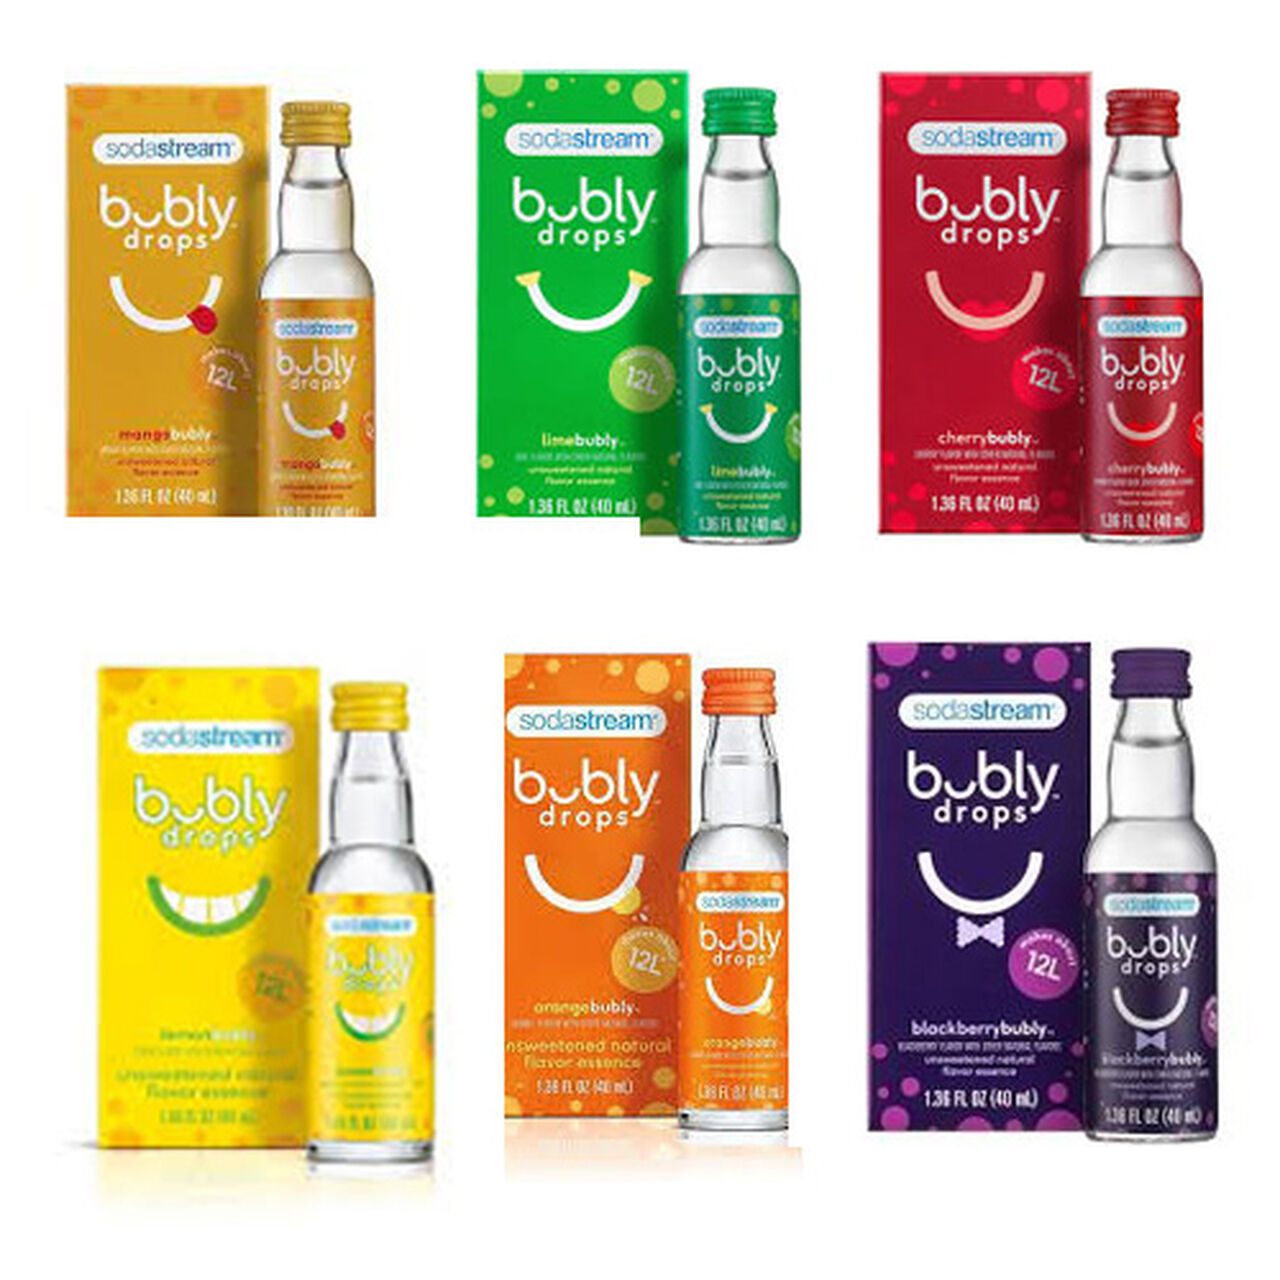 SodaStream Bubly Drops 1.36 fl. oz., , large image number 0